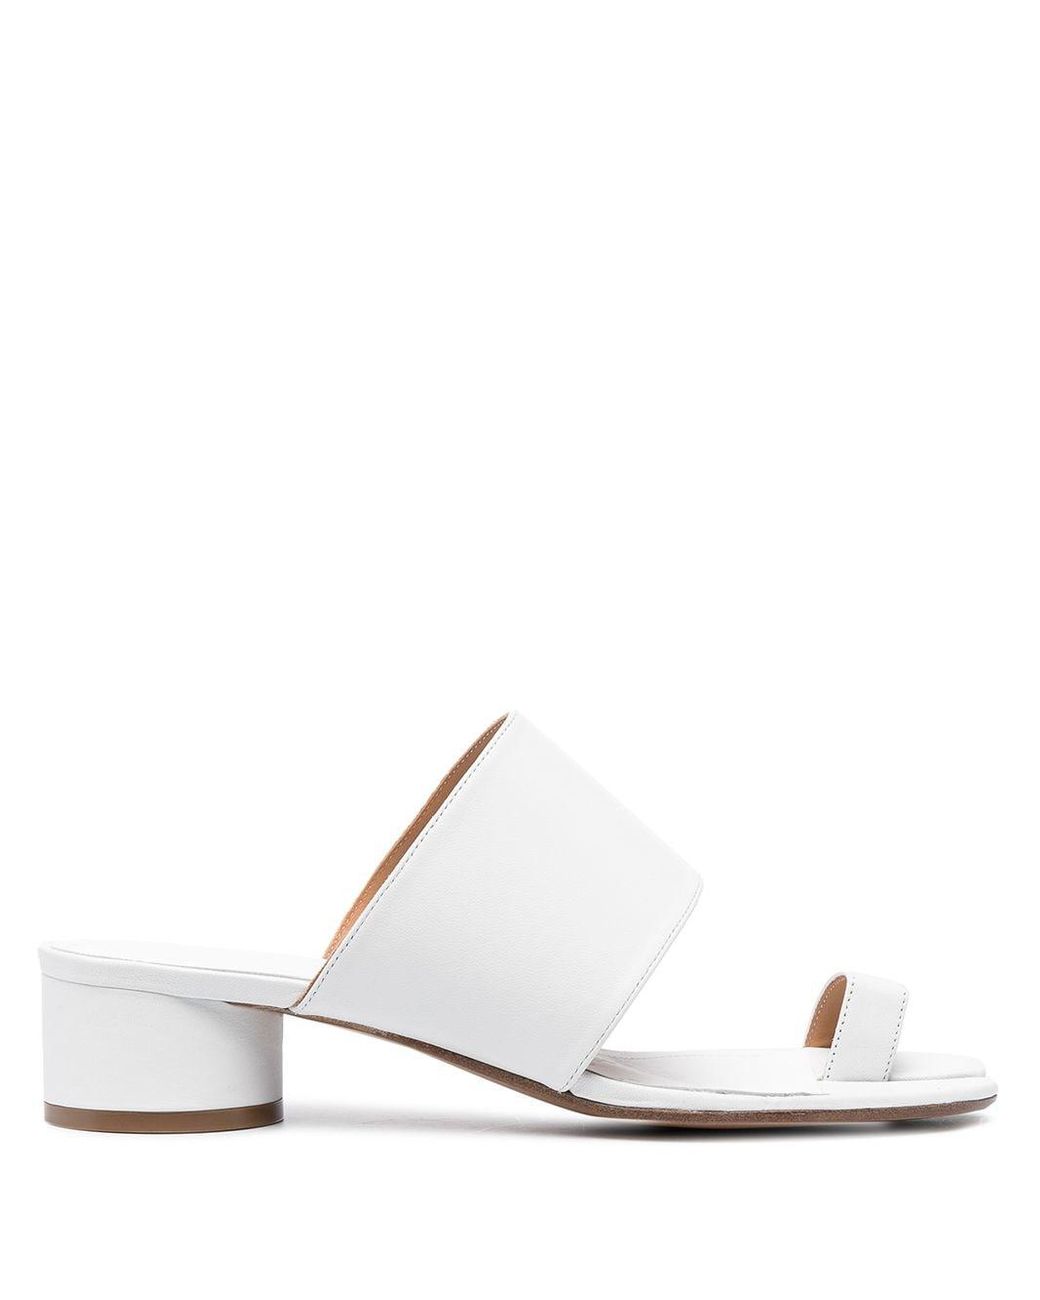 Maison Margiela Leather Tabi Sandals Shoes in White | Lyst